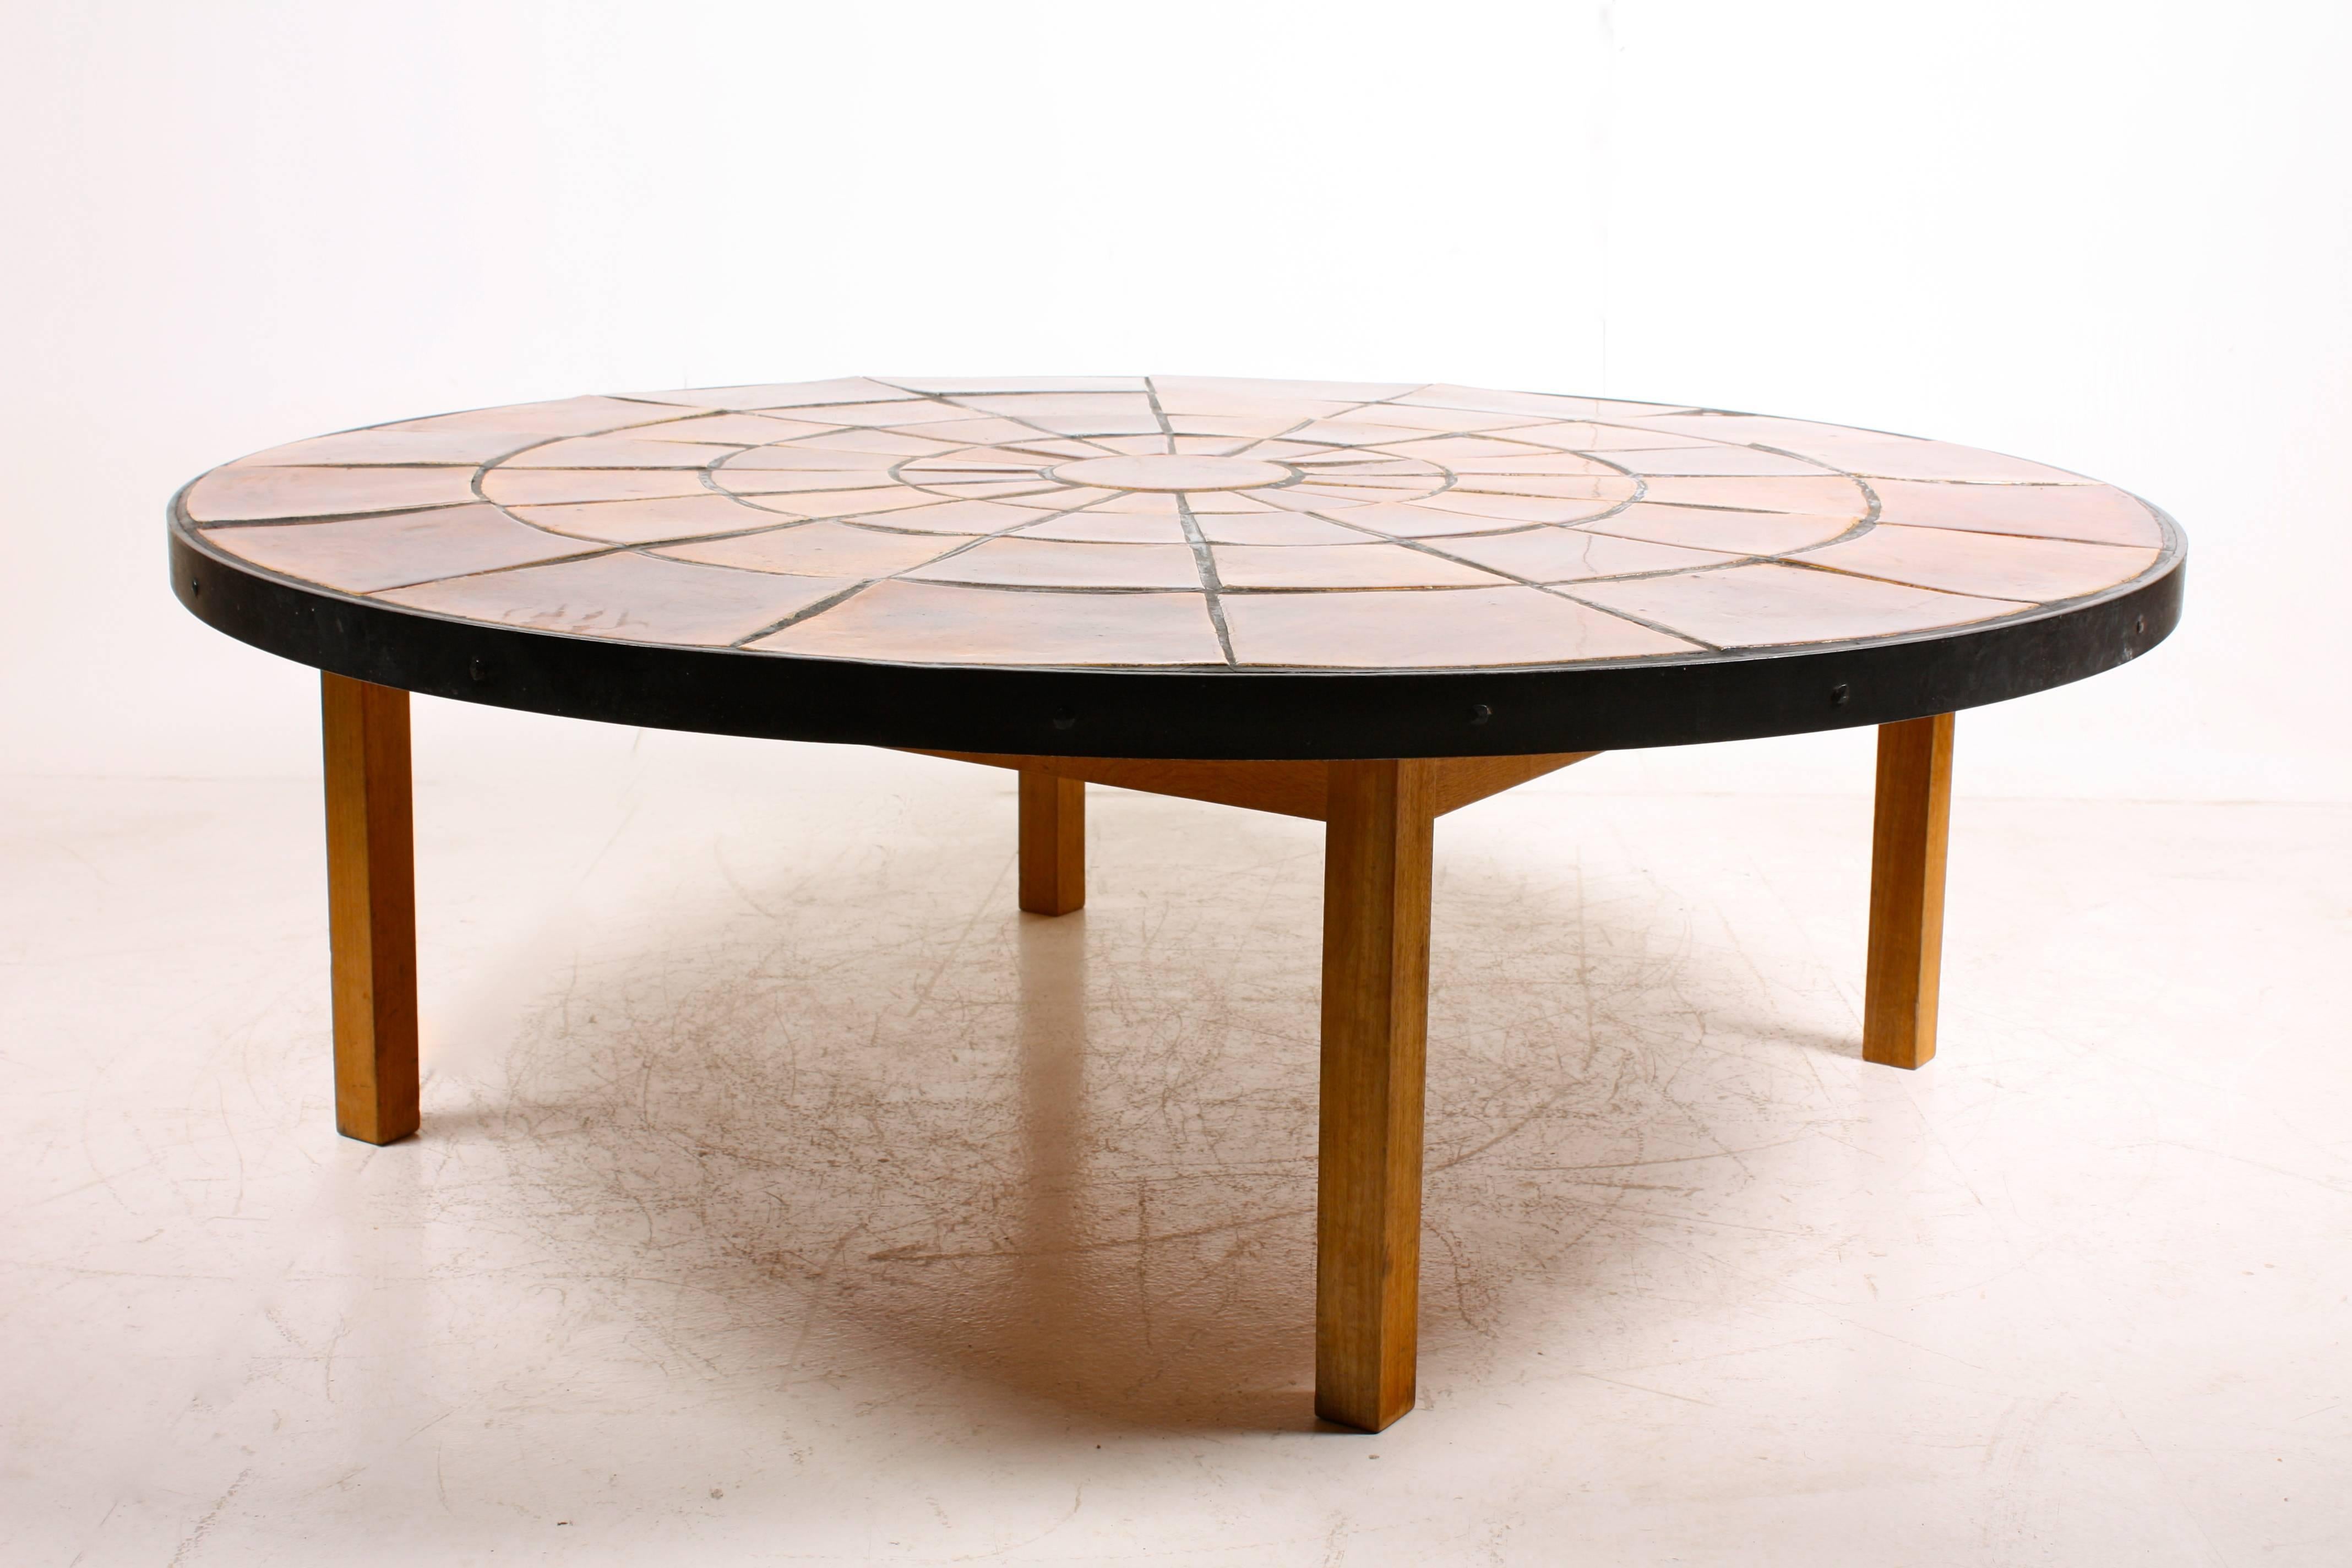 Size XL low table, Handmade ceramic tiles on an oak base.  Made in Bornholm Denmark in the 1970's